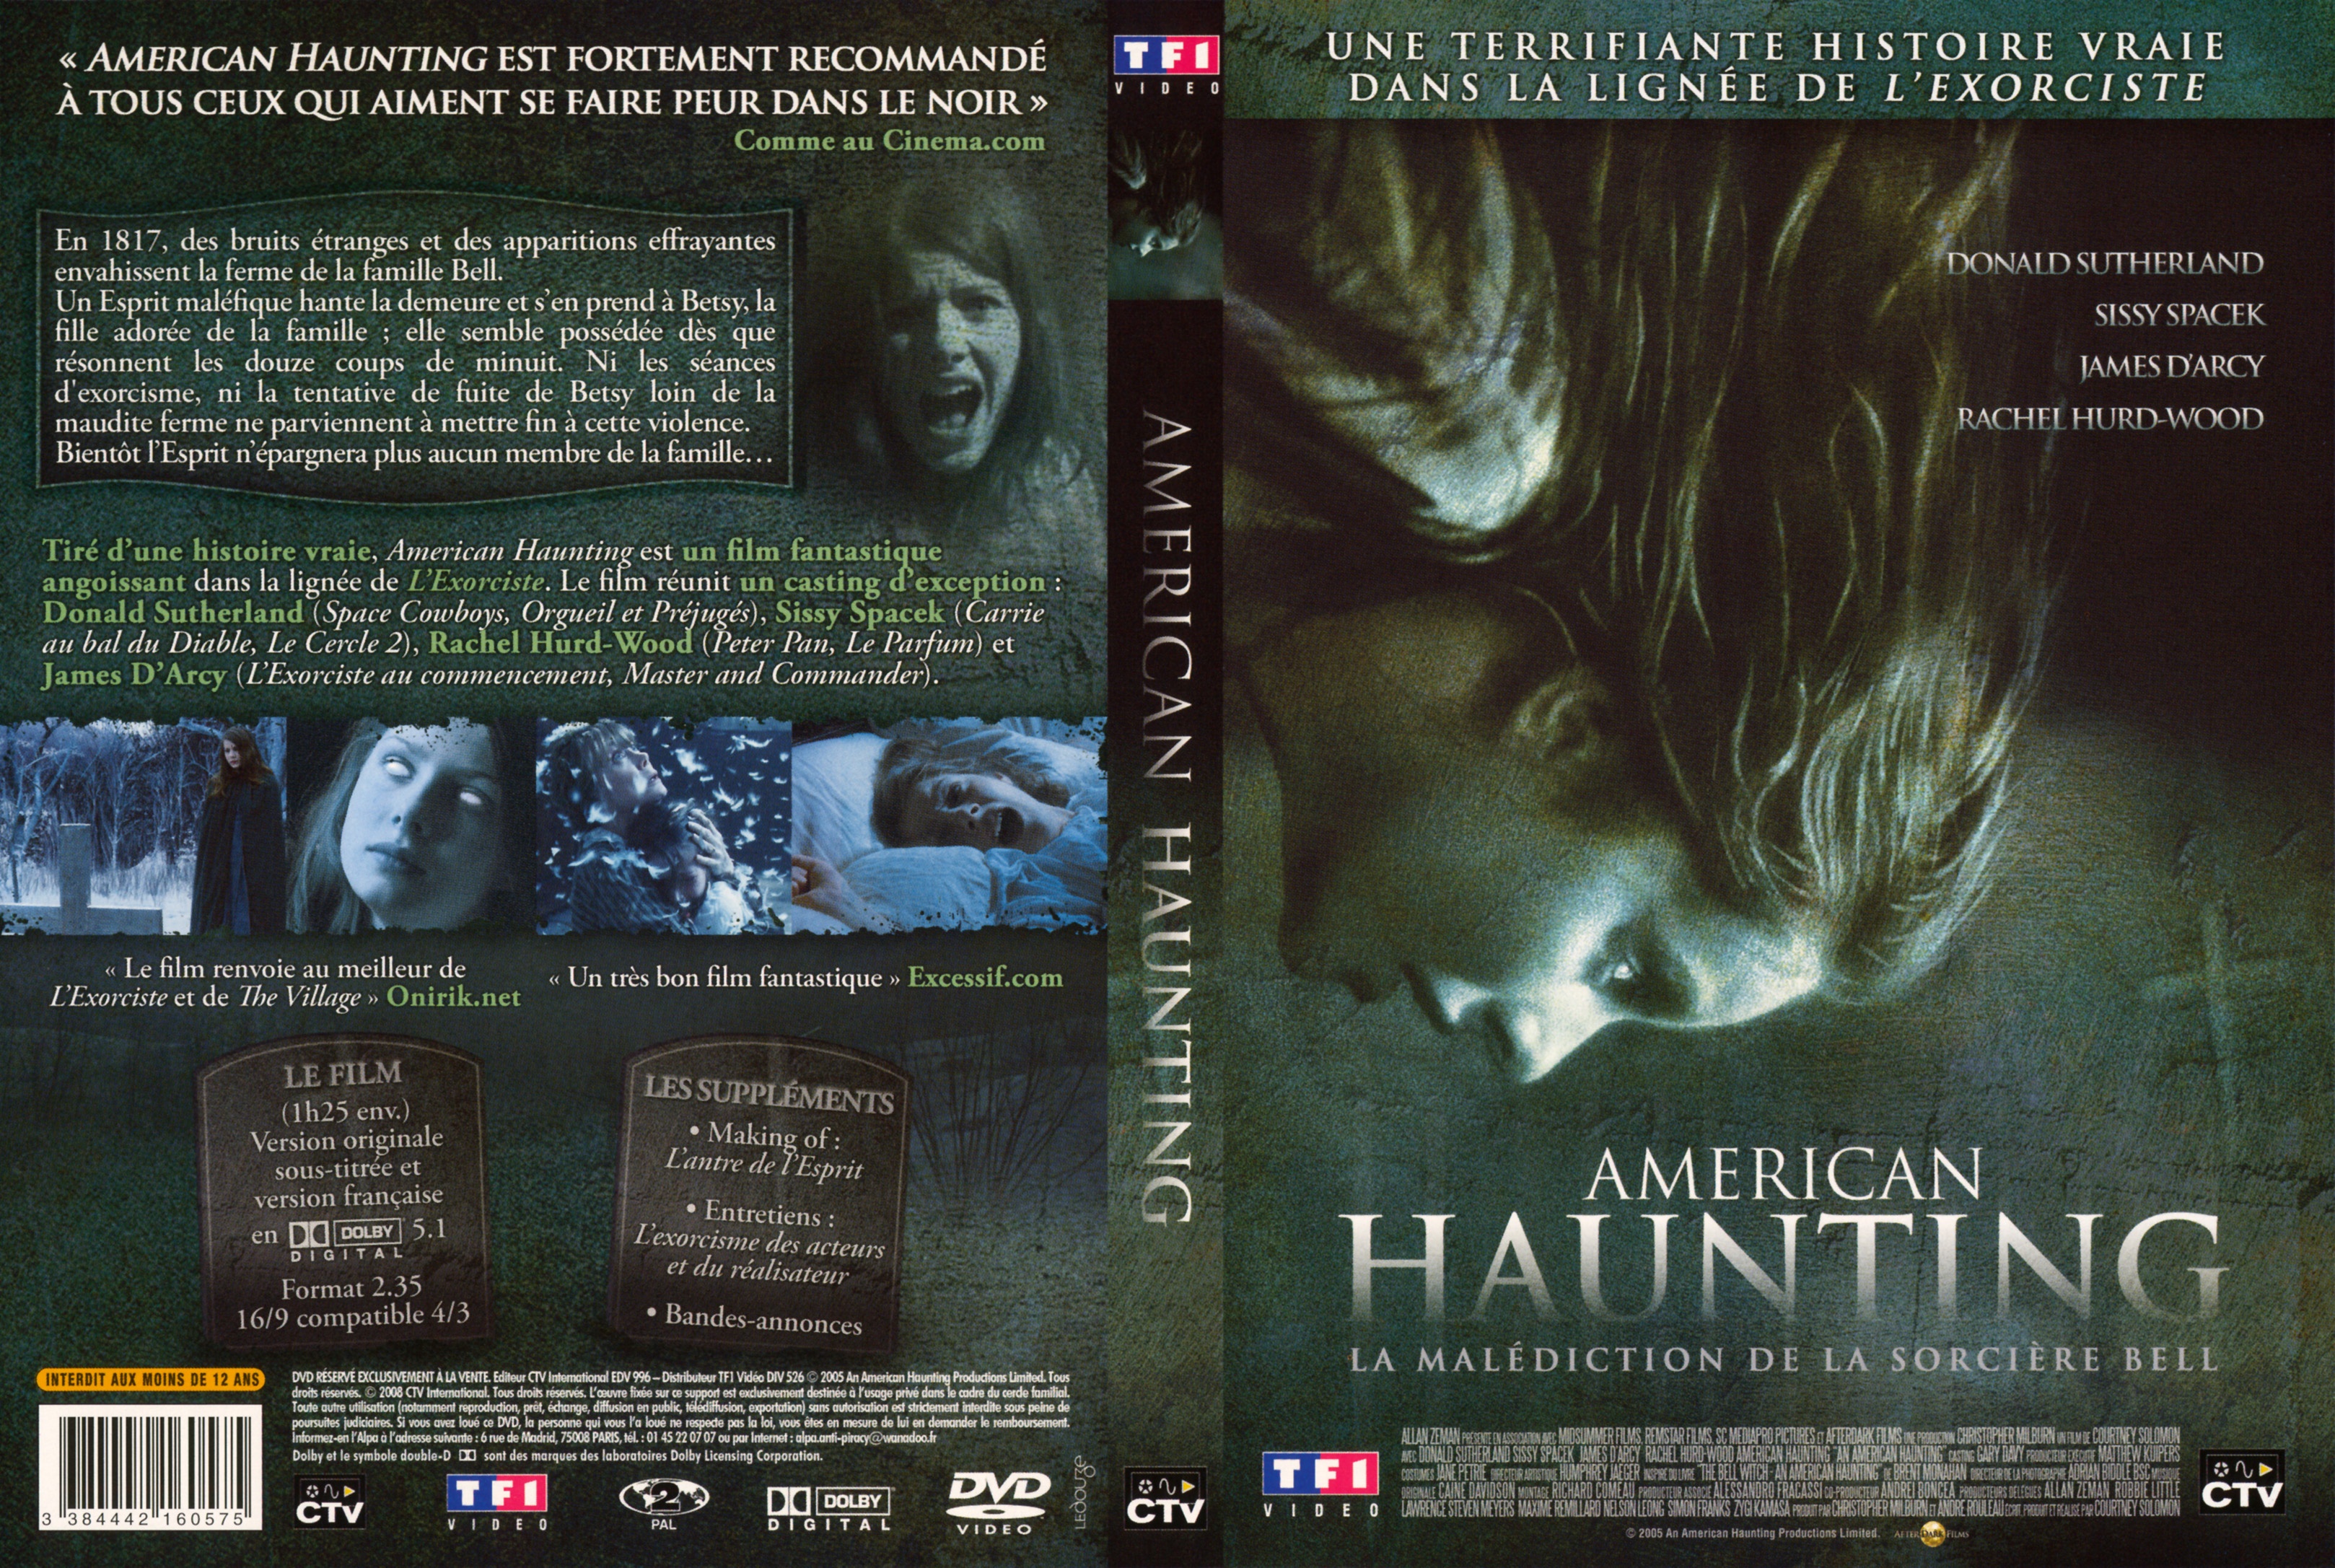 Jaquette DVD American haunting v2